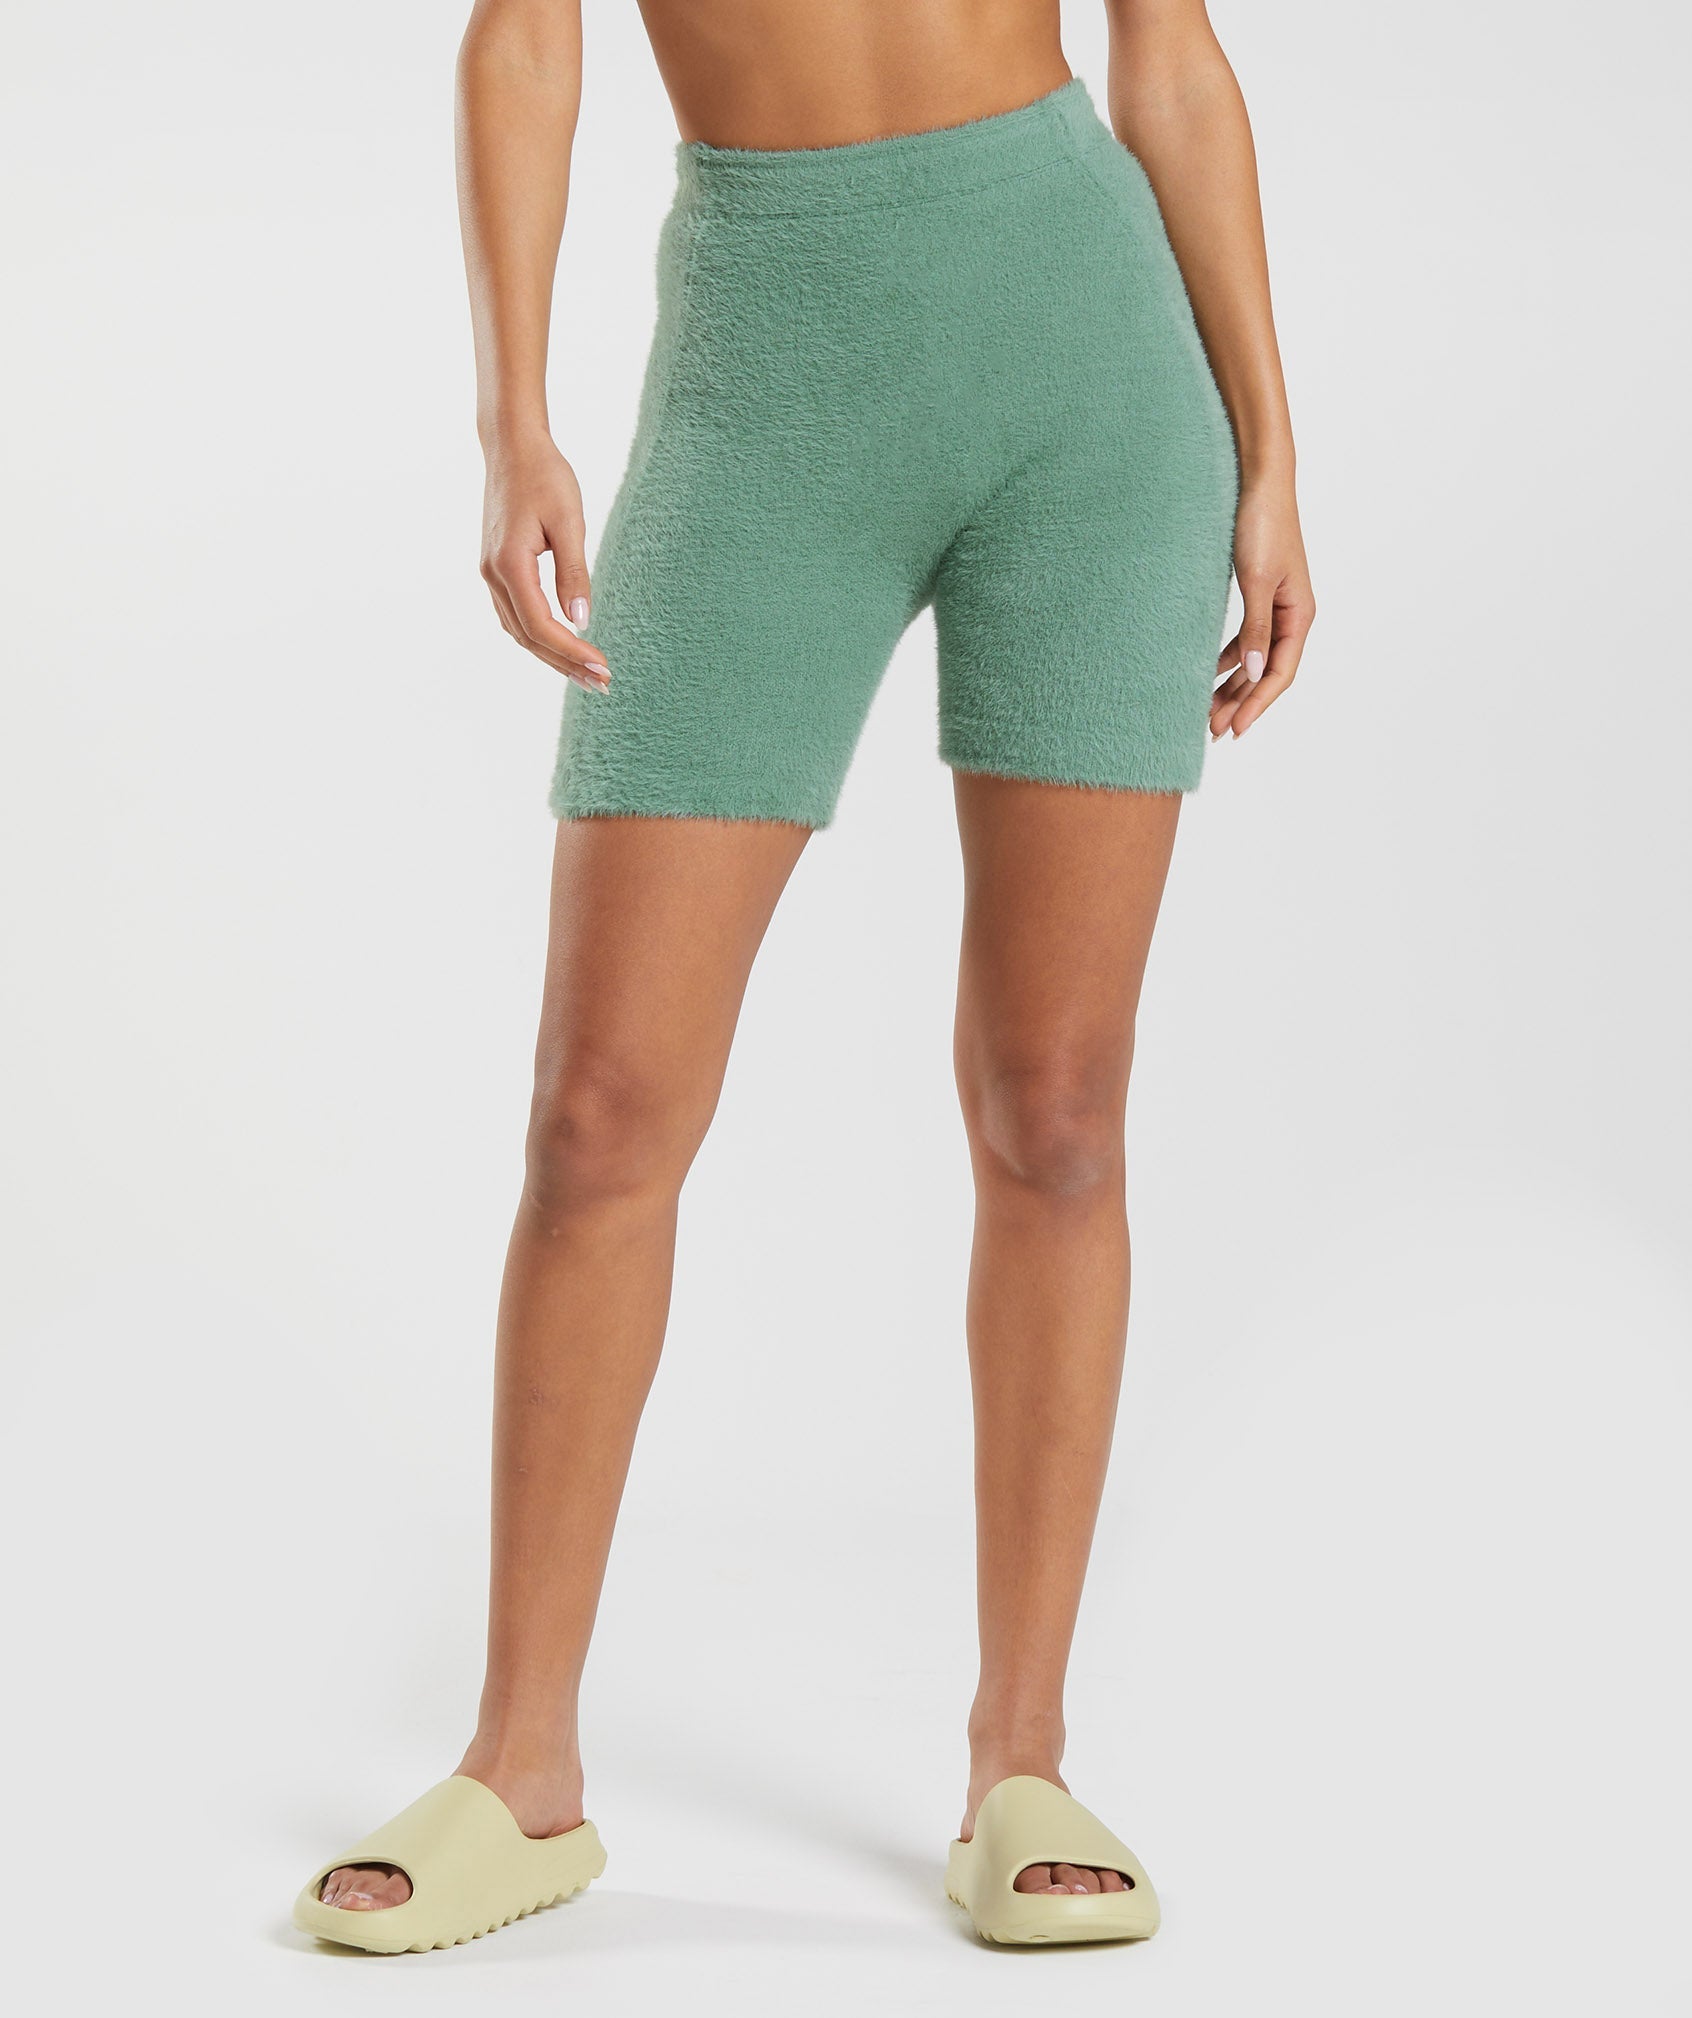 Gymshark Whitney Simmons Cylcling Shorts in Mink, Women's Fashion